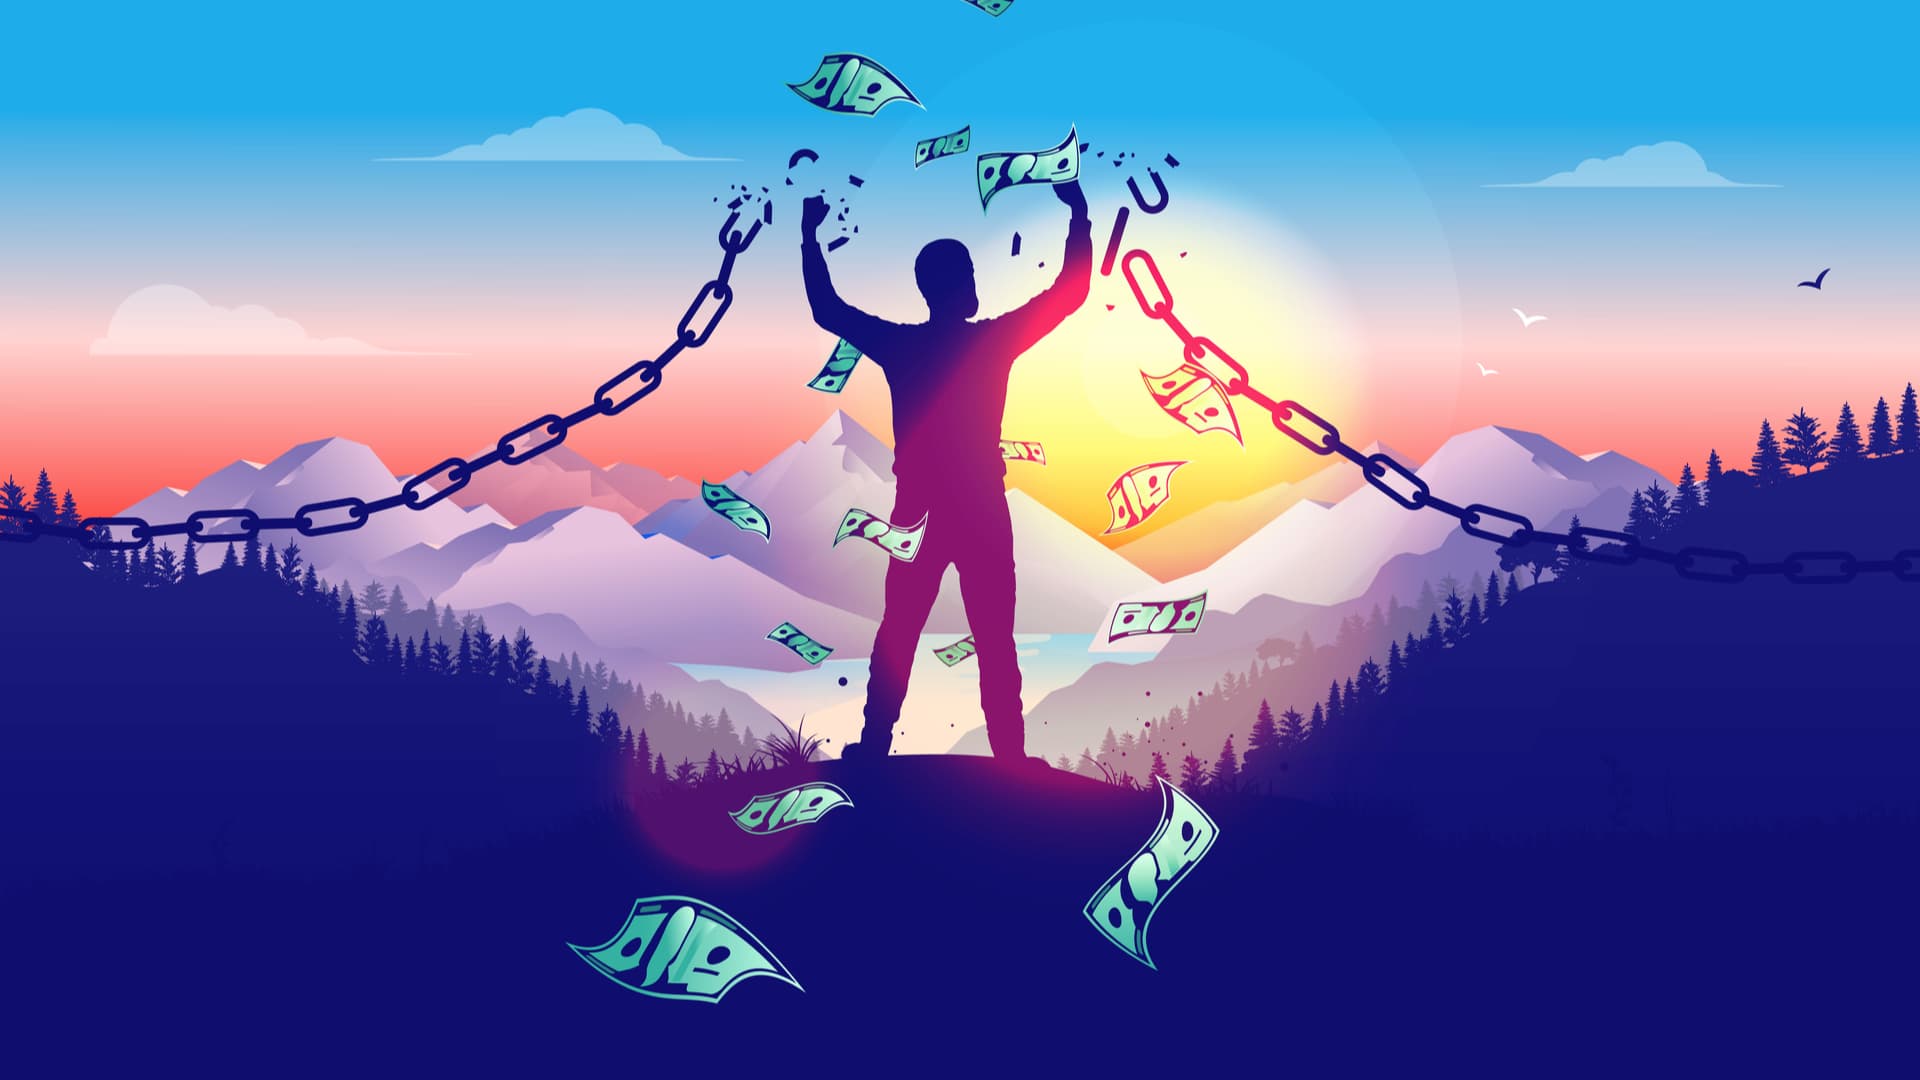 Man on a mountain freeing himself from chains and cash in the air